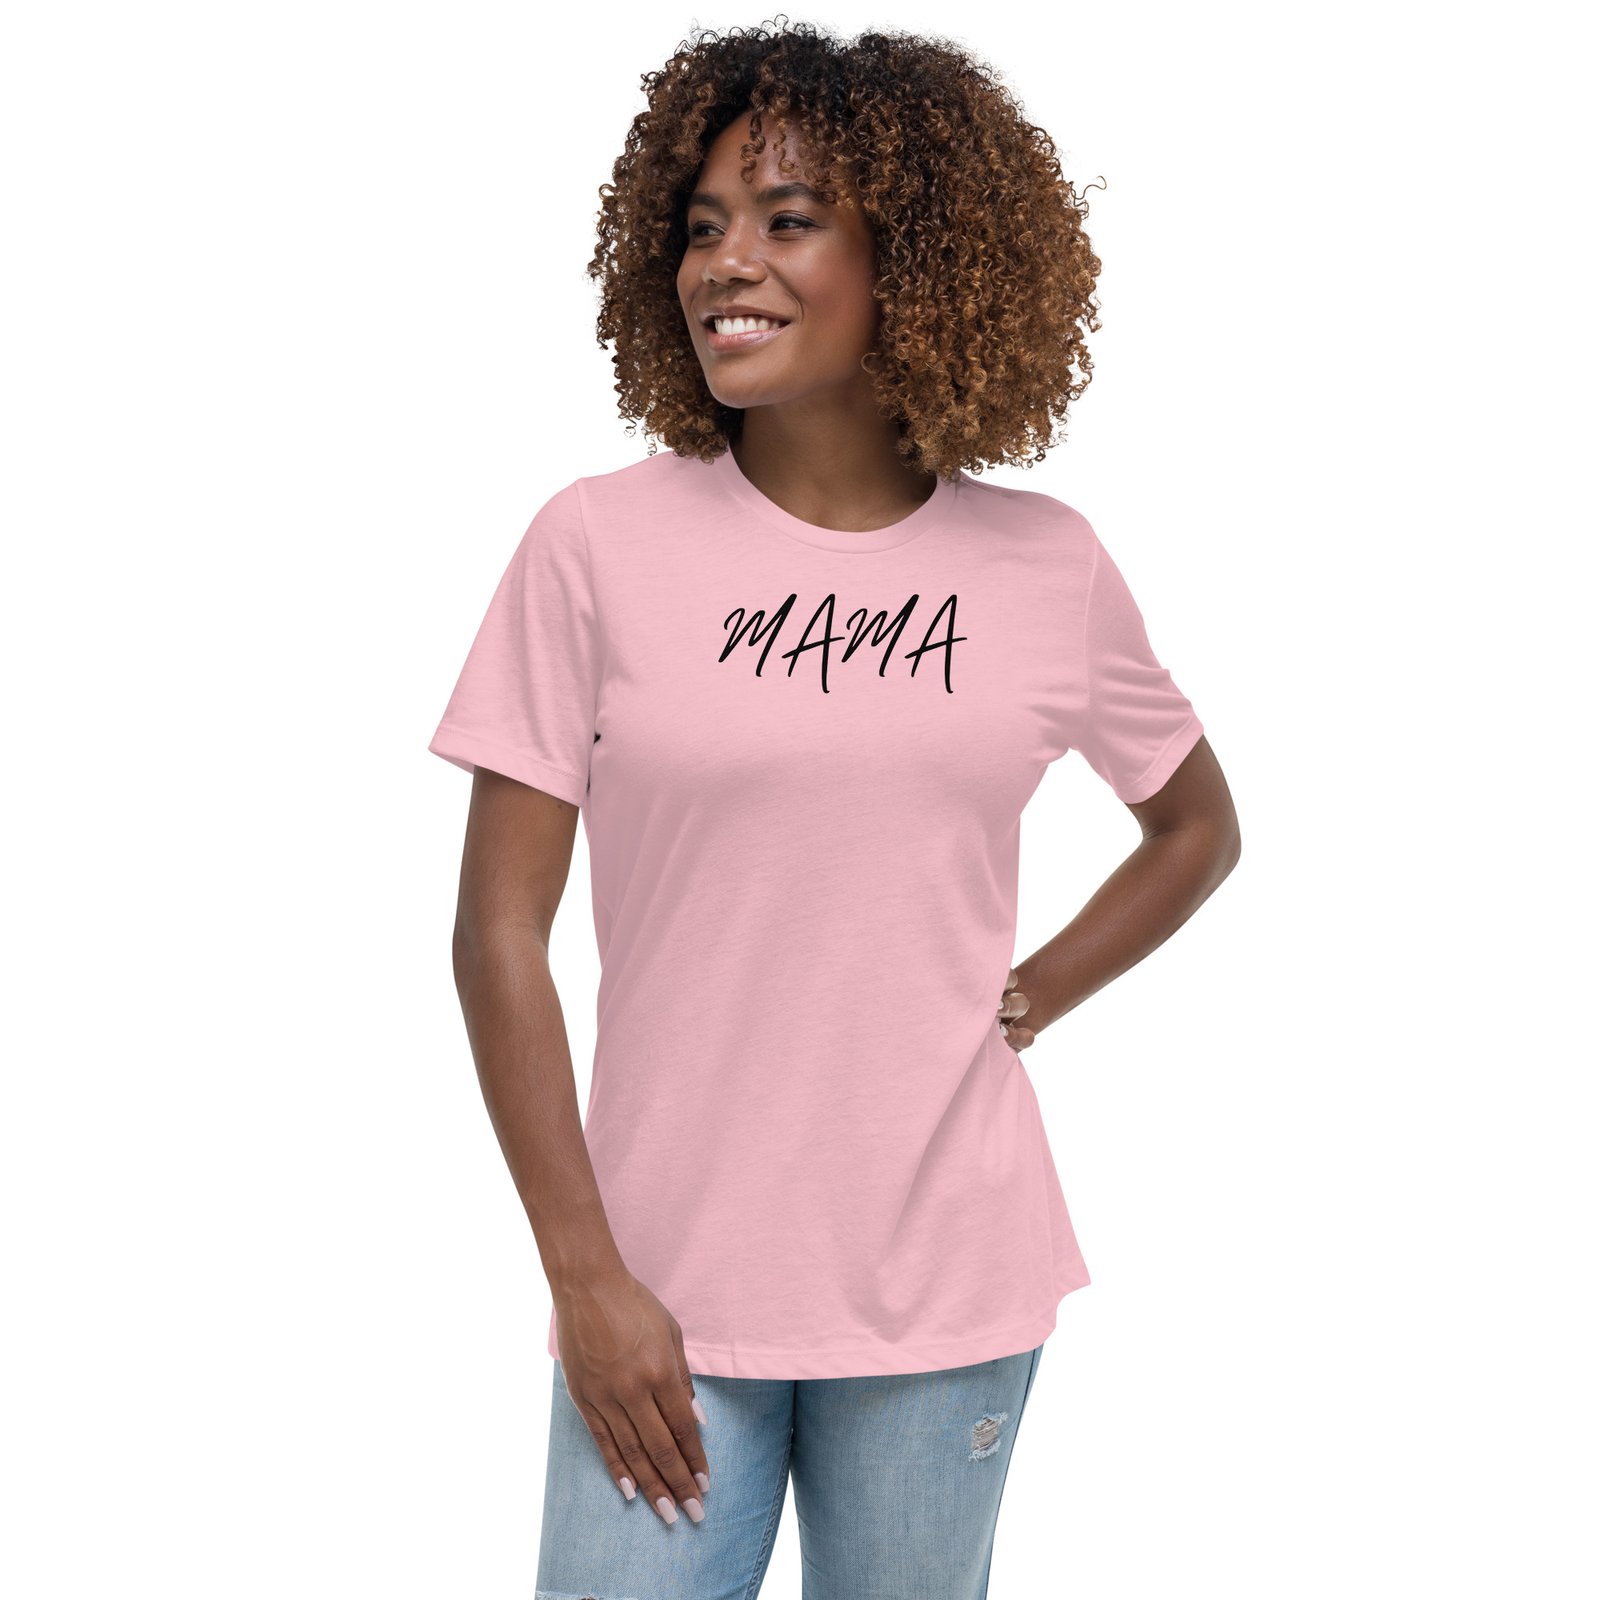 womens relaxed t shirt pink front 65b160b0a4428 - Mama Clothing Store - For Great Mamas